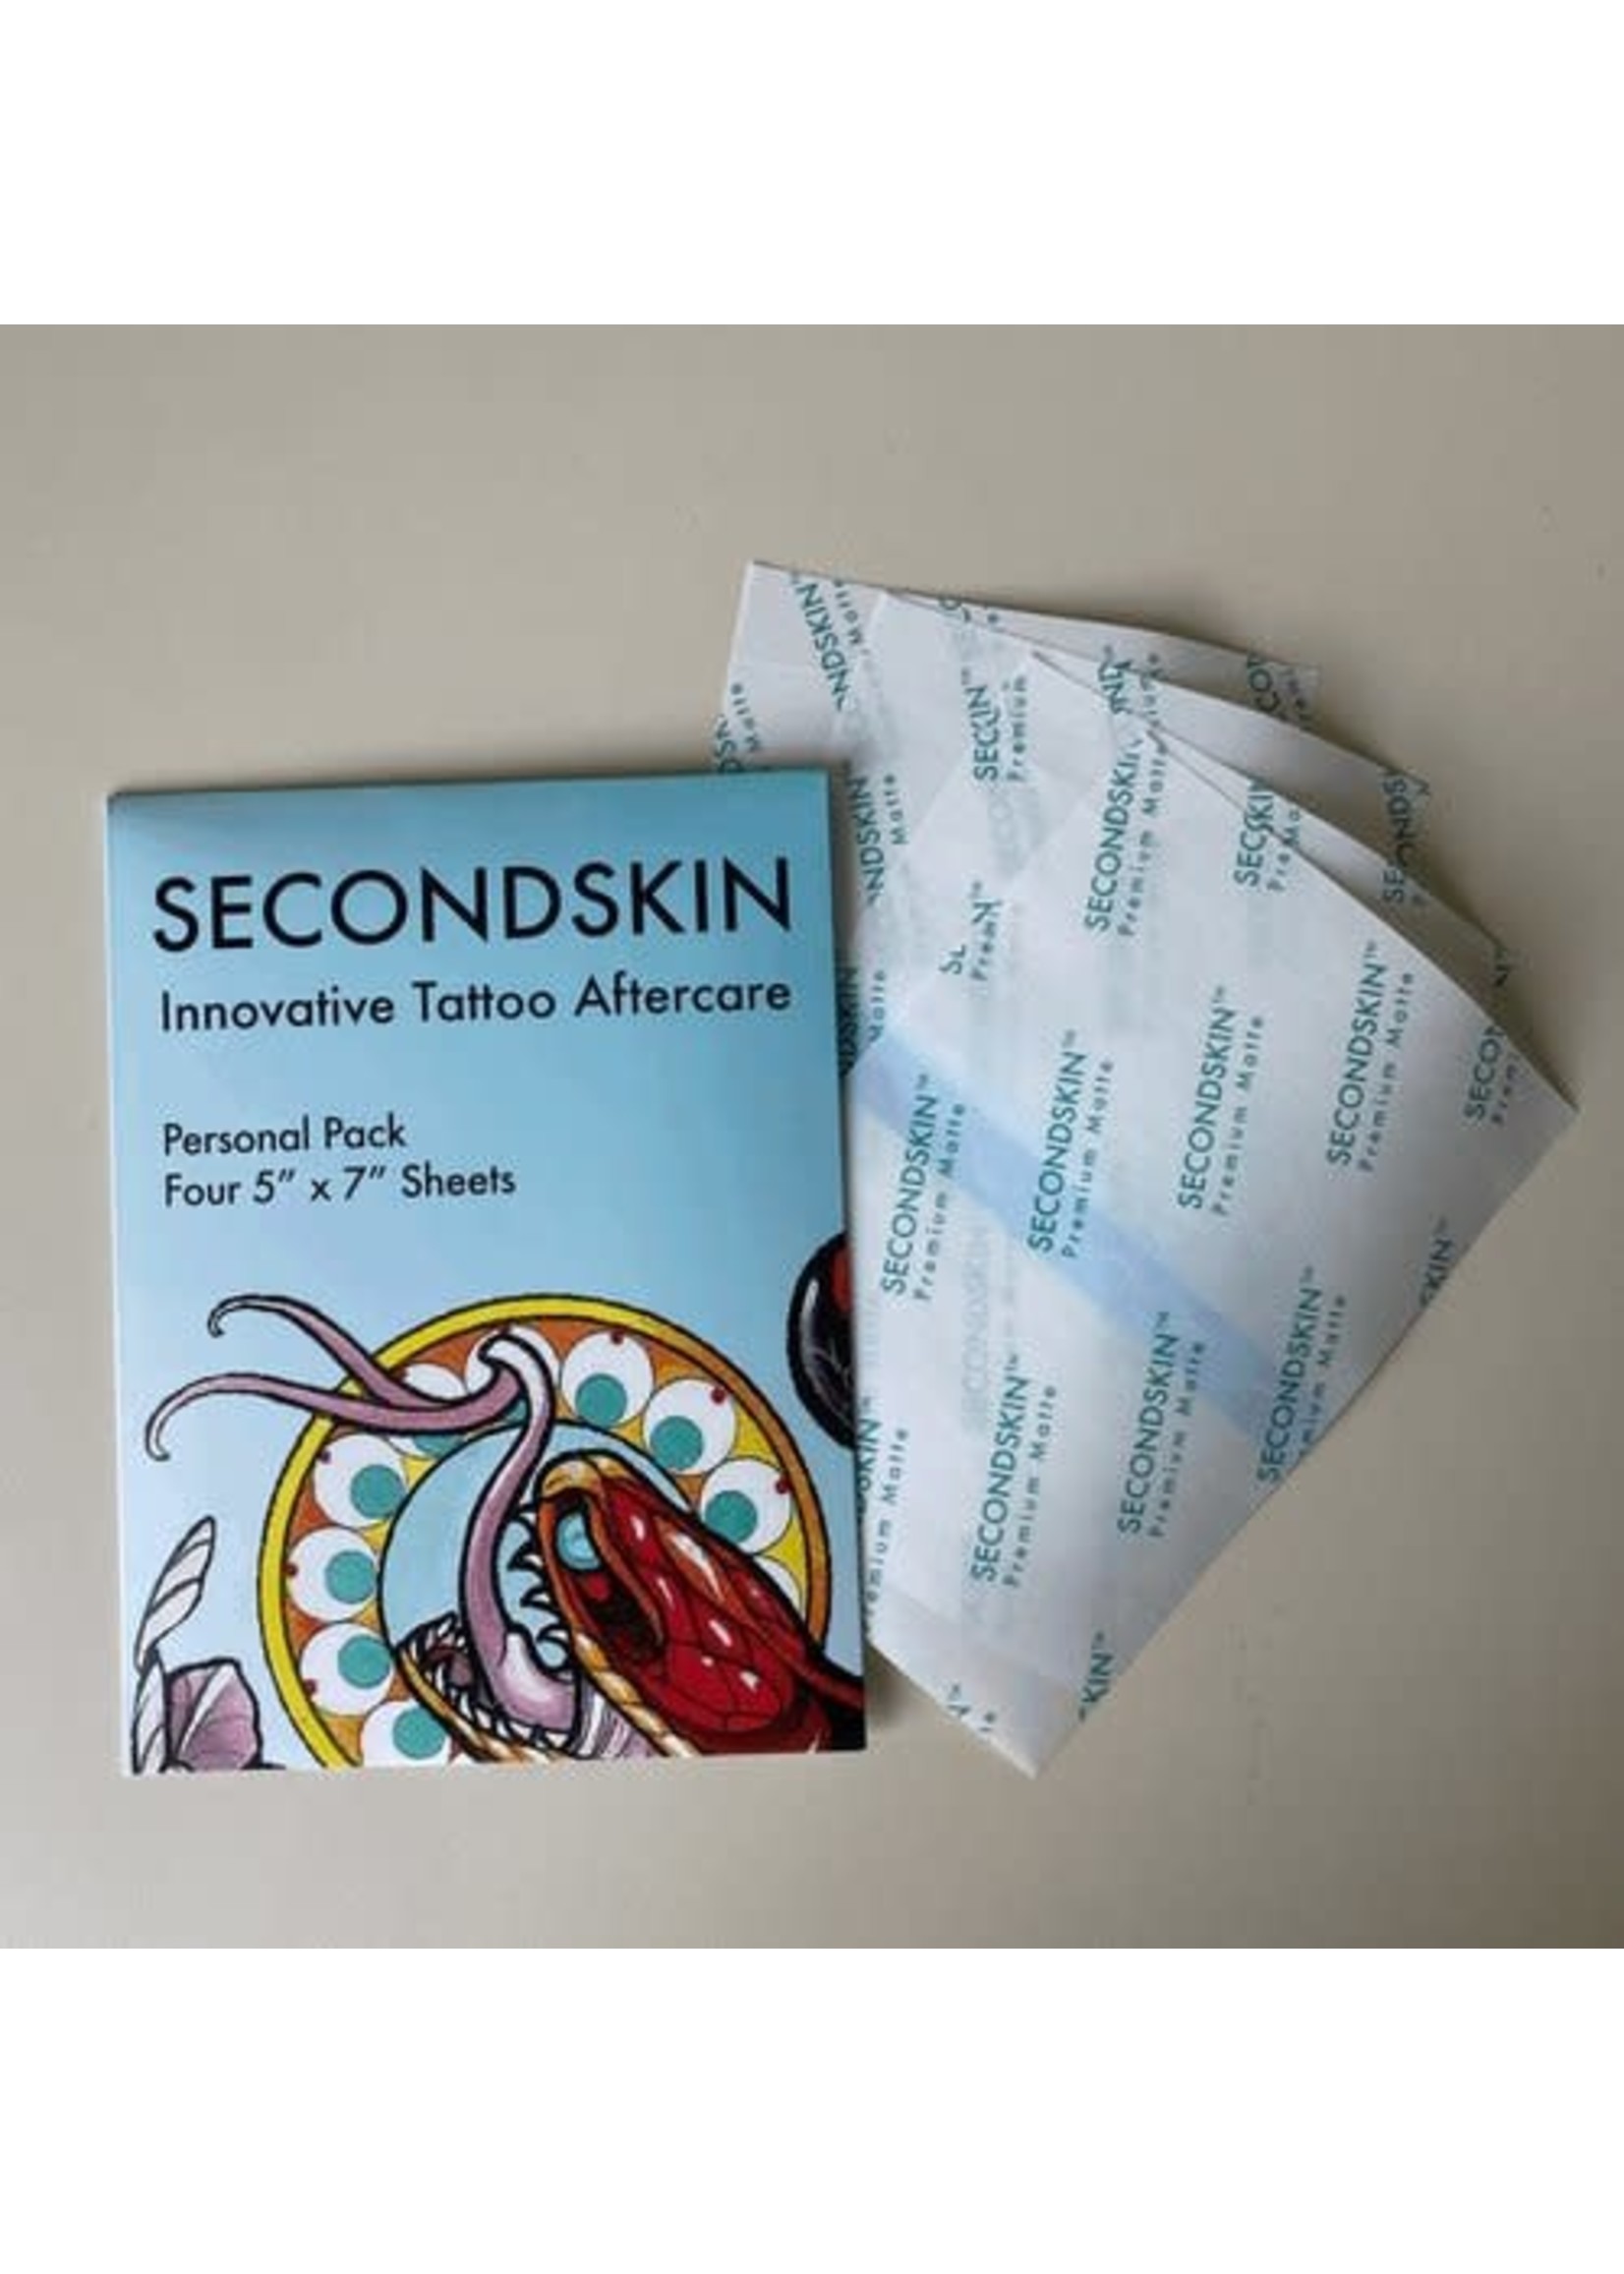 Second Skin Second Skin Personal Pack (Four 5" x 7" sheets)